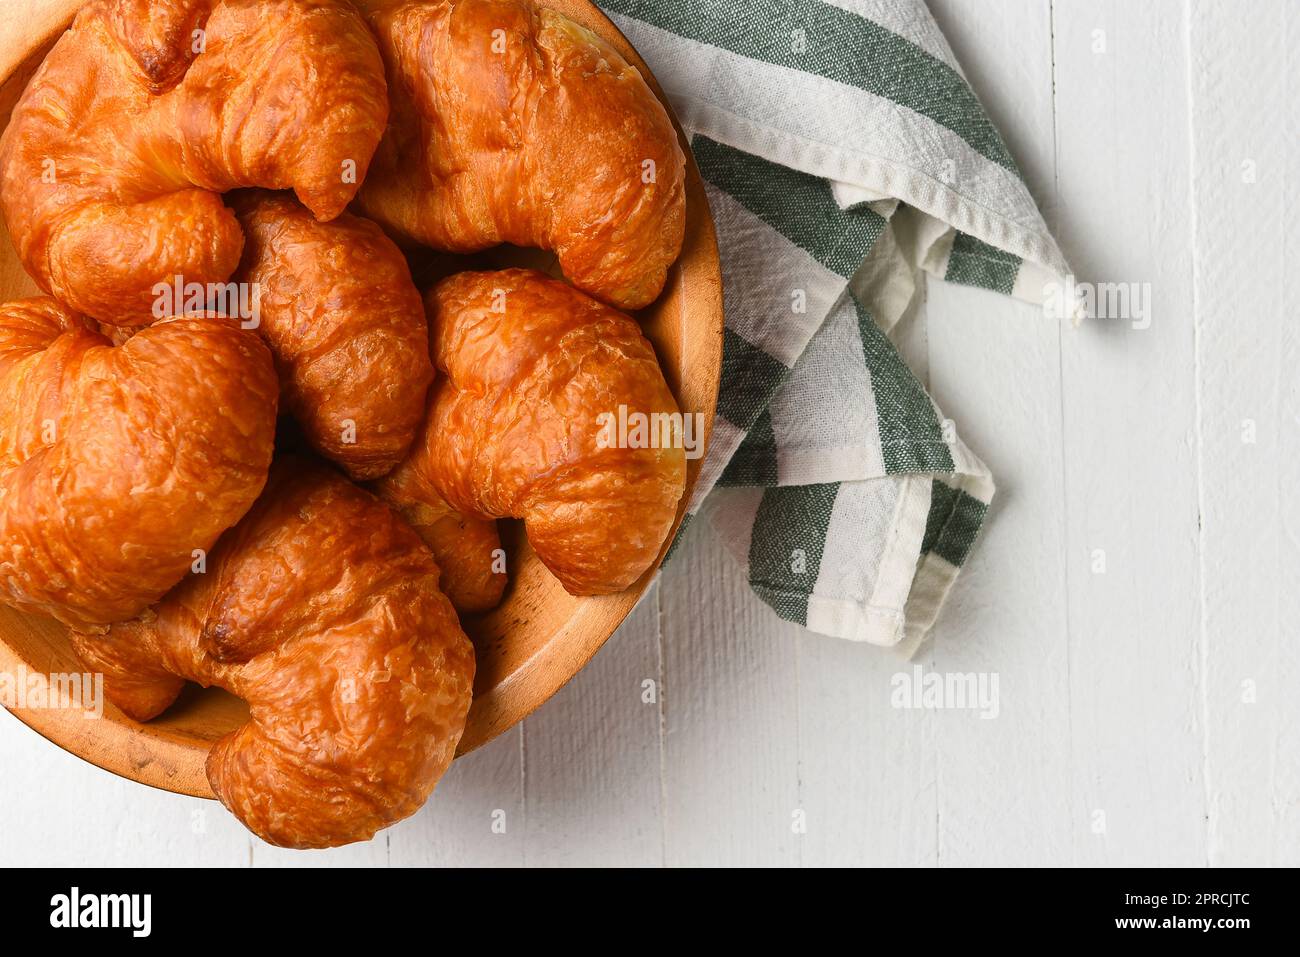 A wooden bowl full of fresh baked croissants on a whie wood table with kitchen towel. Stock Photo